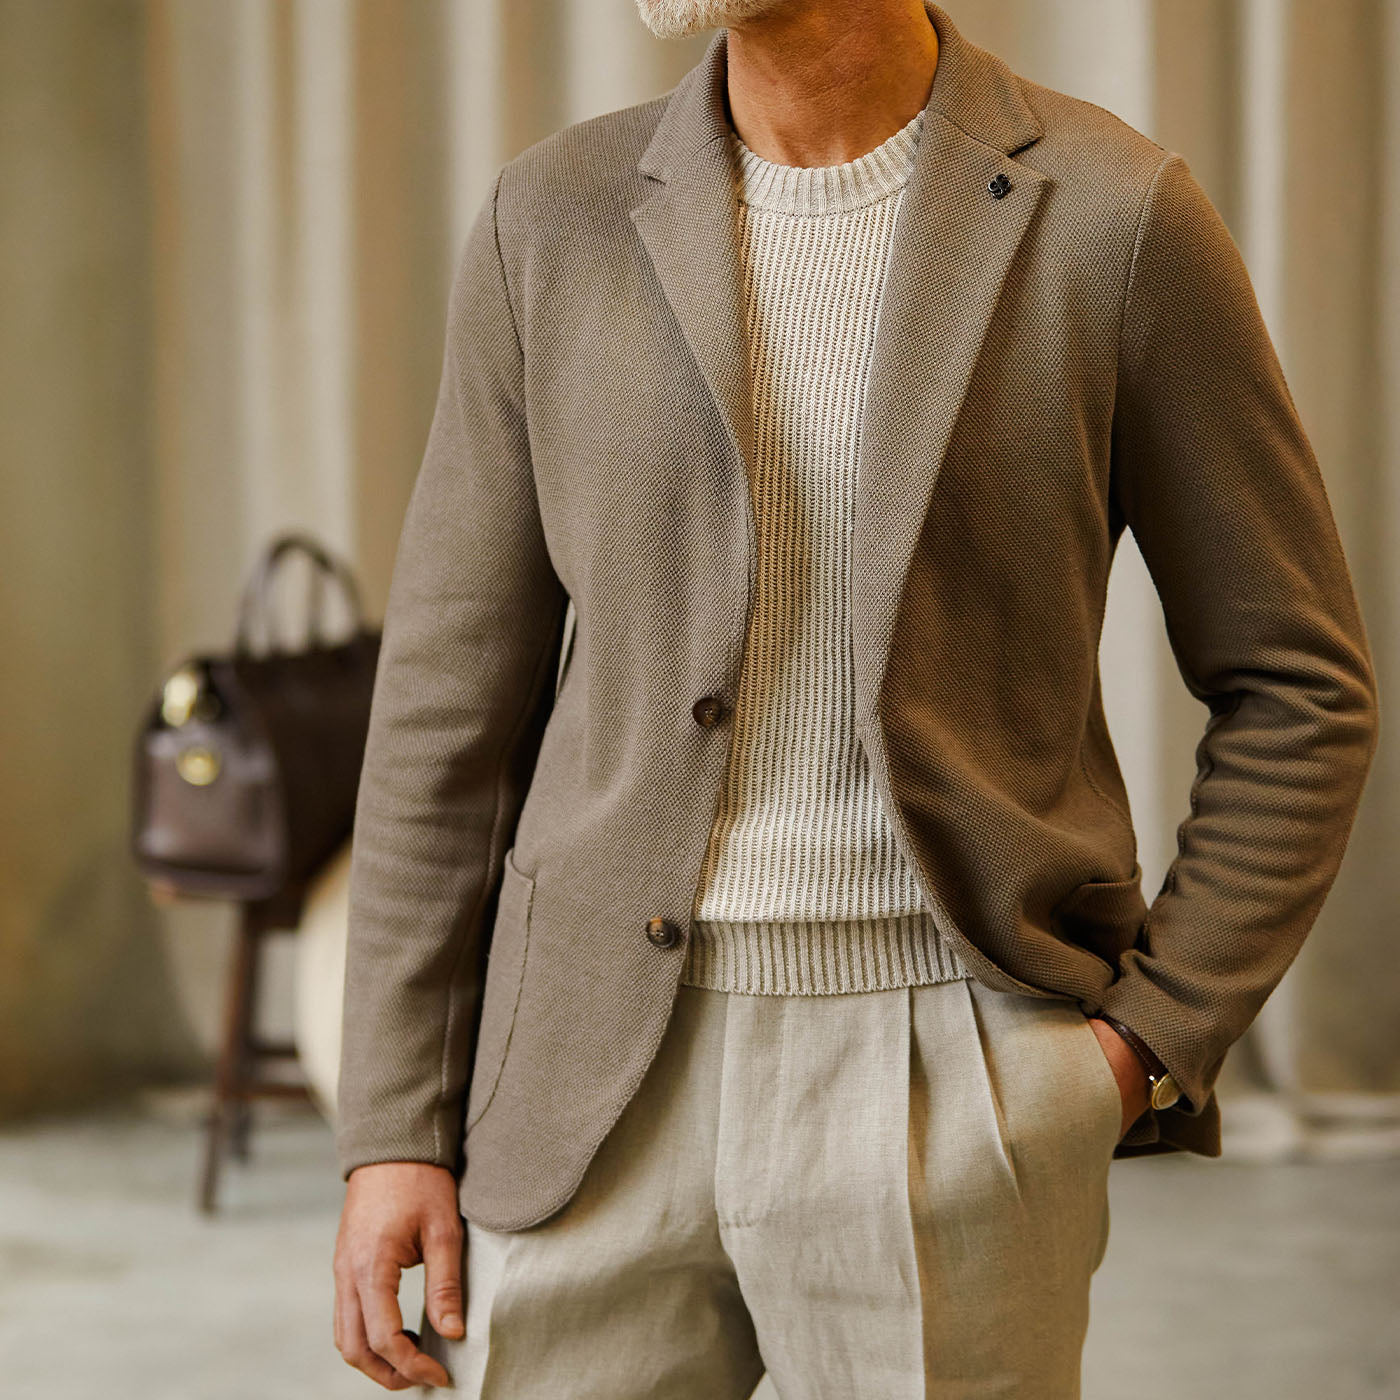 A person wearing a stylish Gran Sasso taupe brown cotton linen knitted blazer over a ribbed white sweater paired with light grey trousers, posing with one hand in their pocket. A brown leather bag is visible in the background.